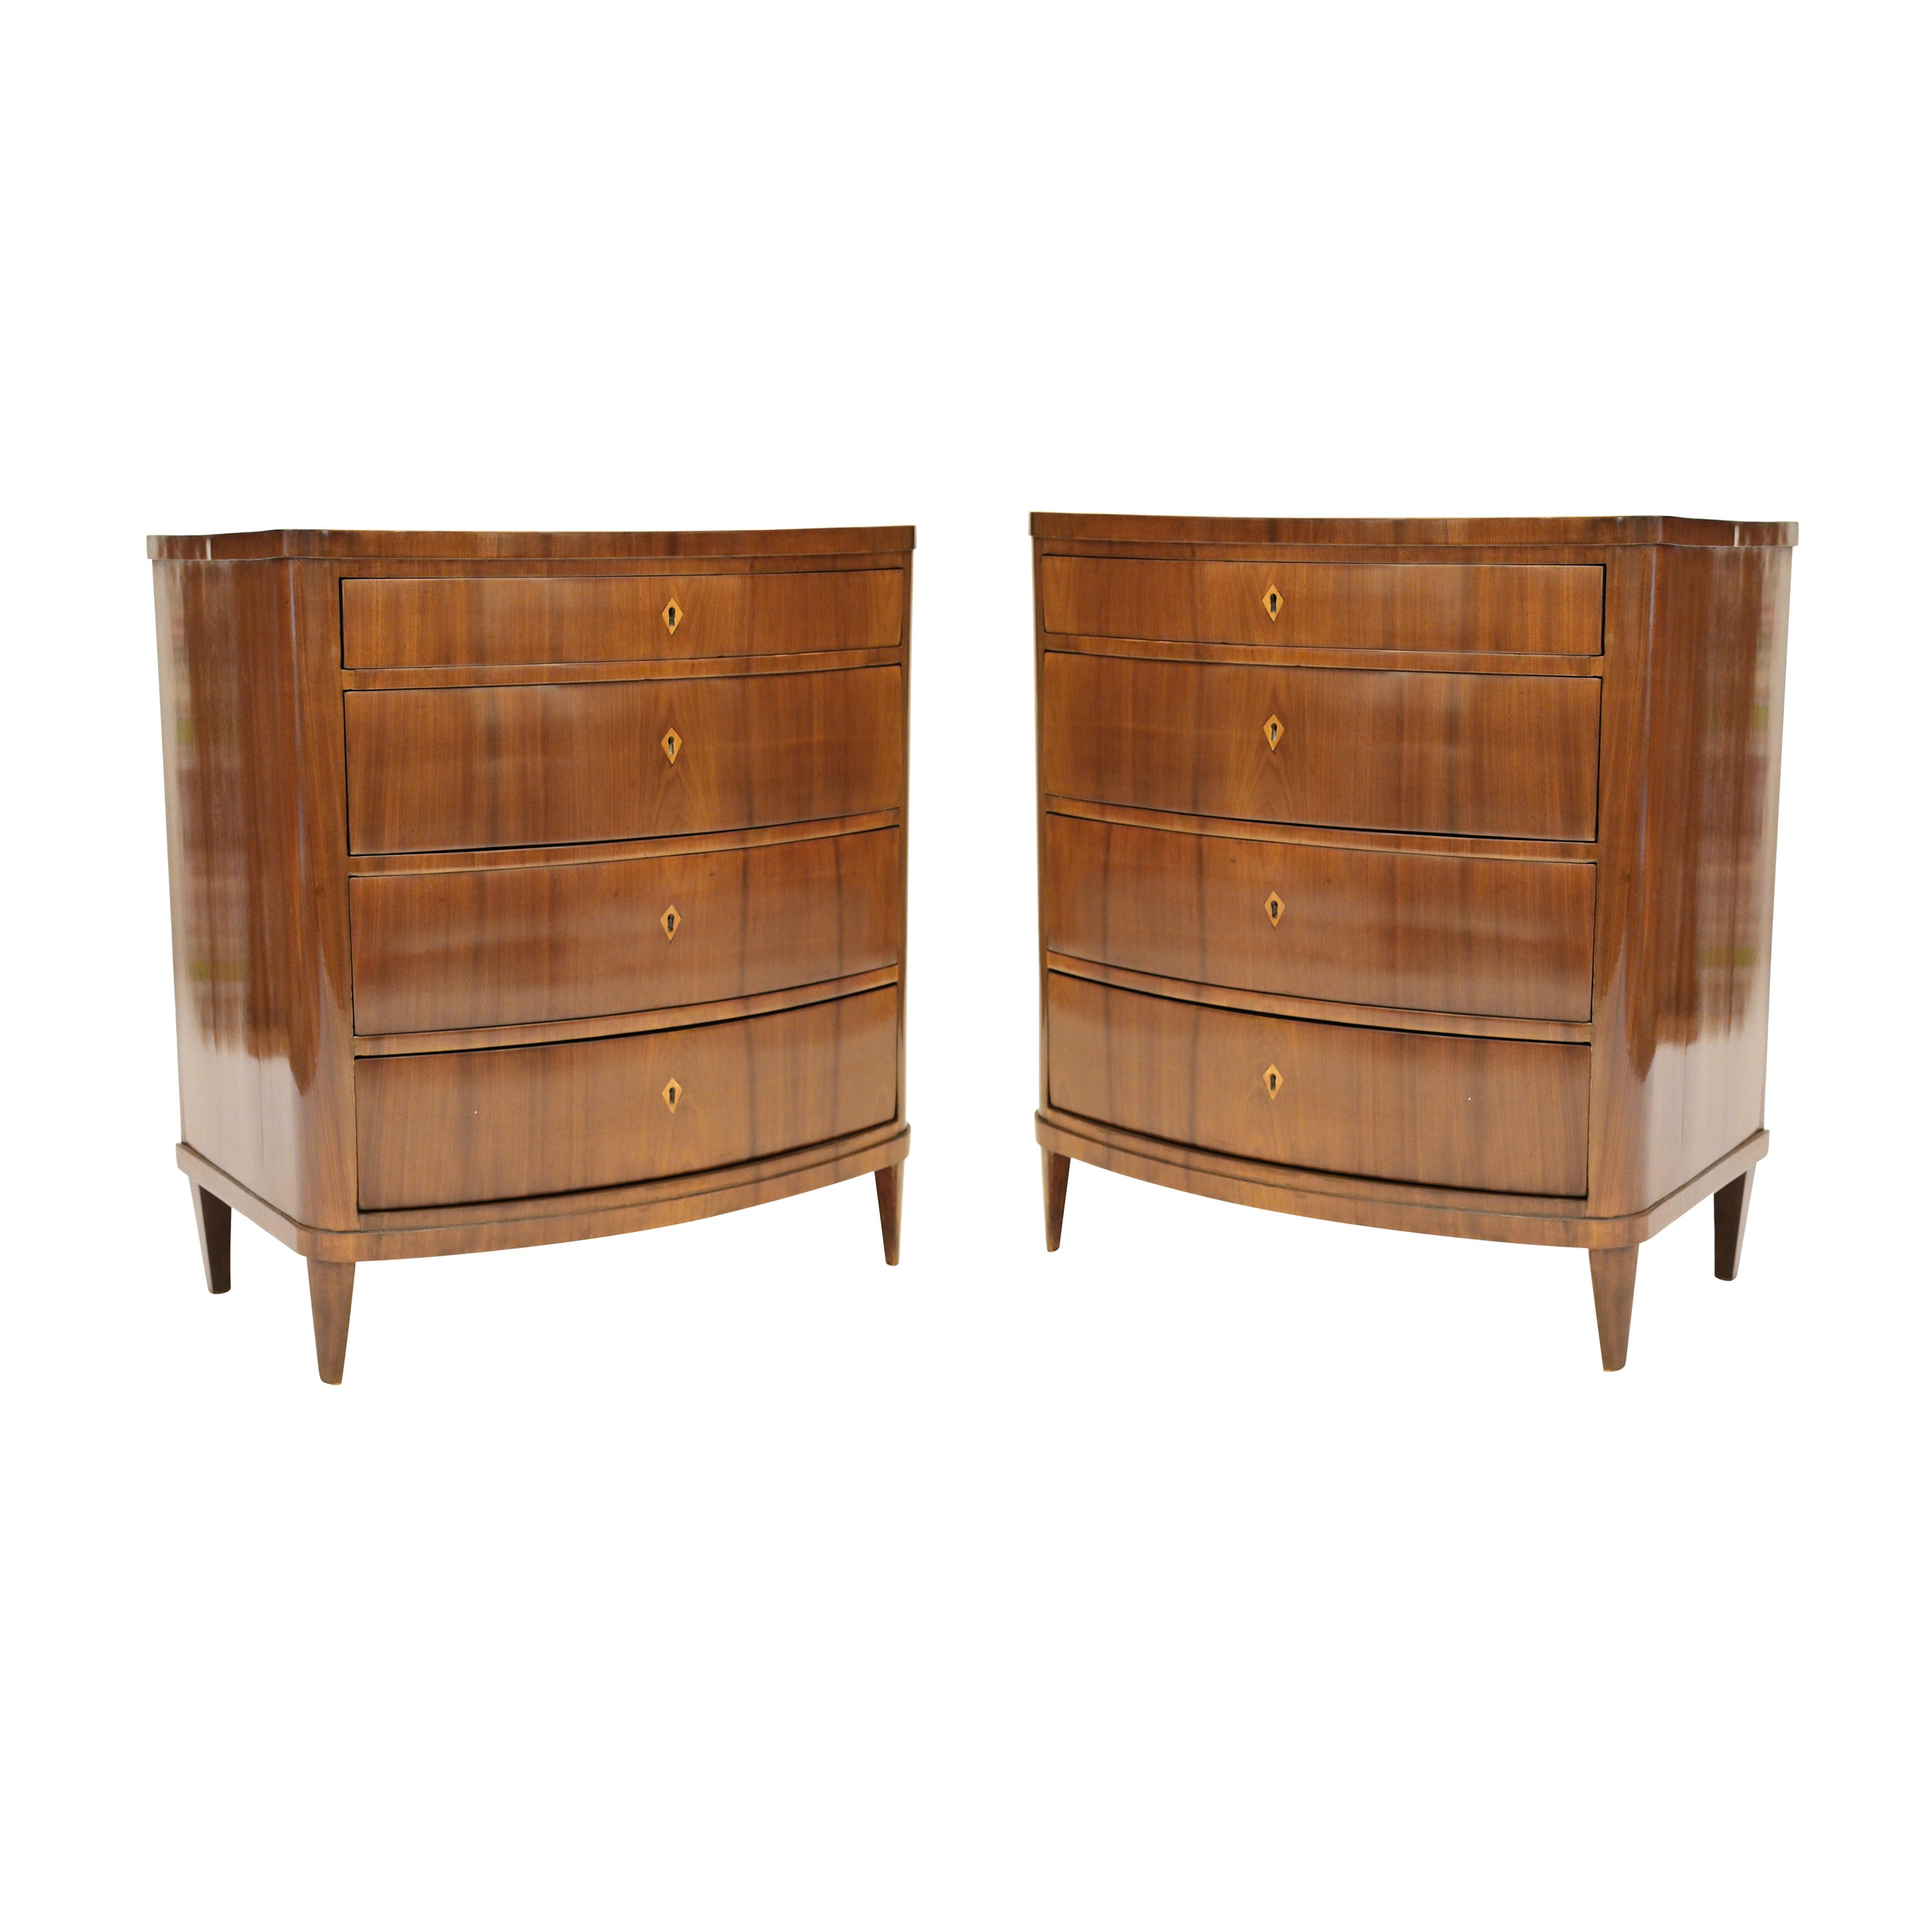 Pair of 19th Century Northern European Bow Front Chests